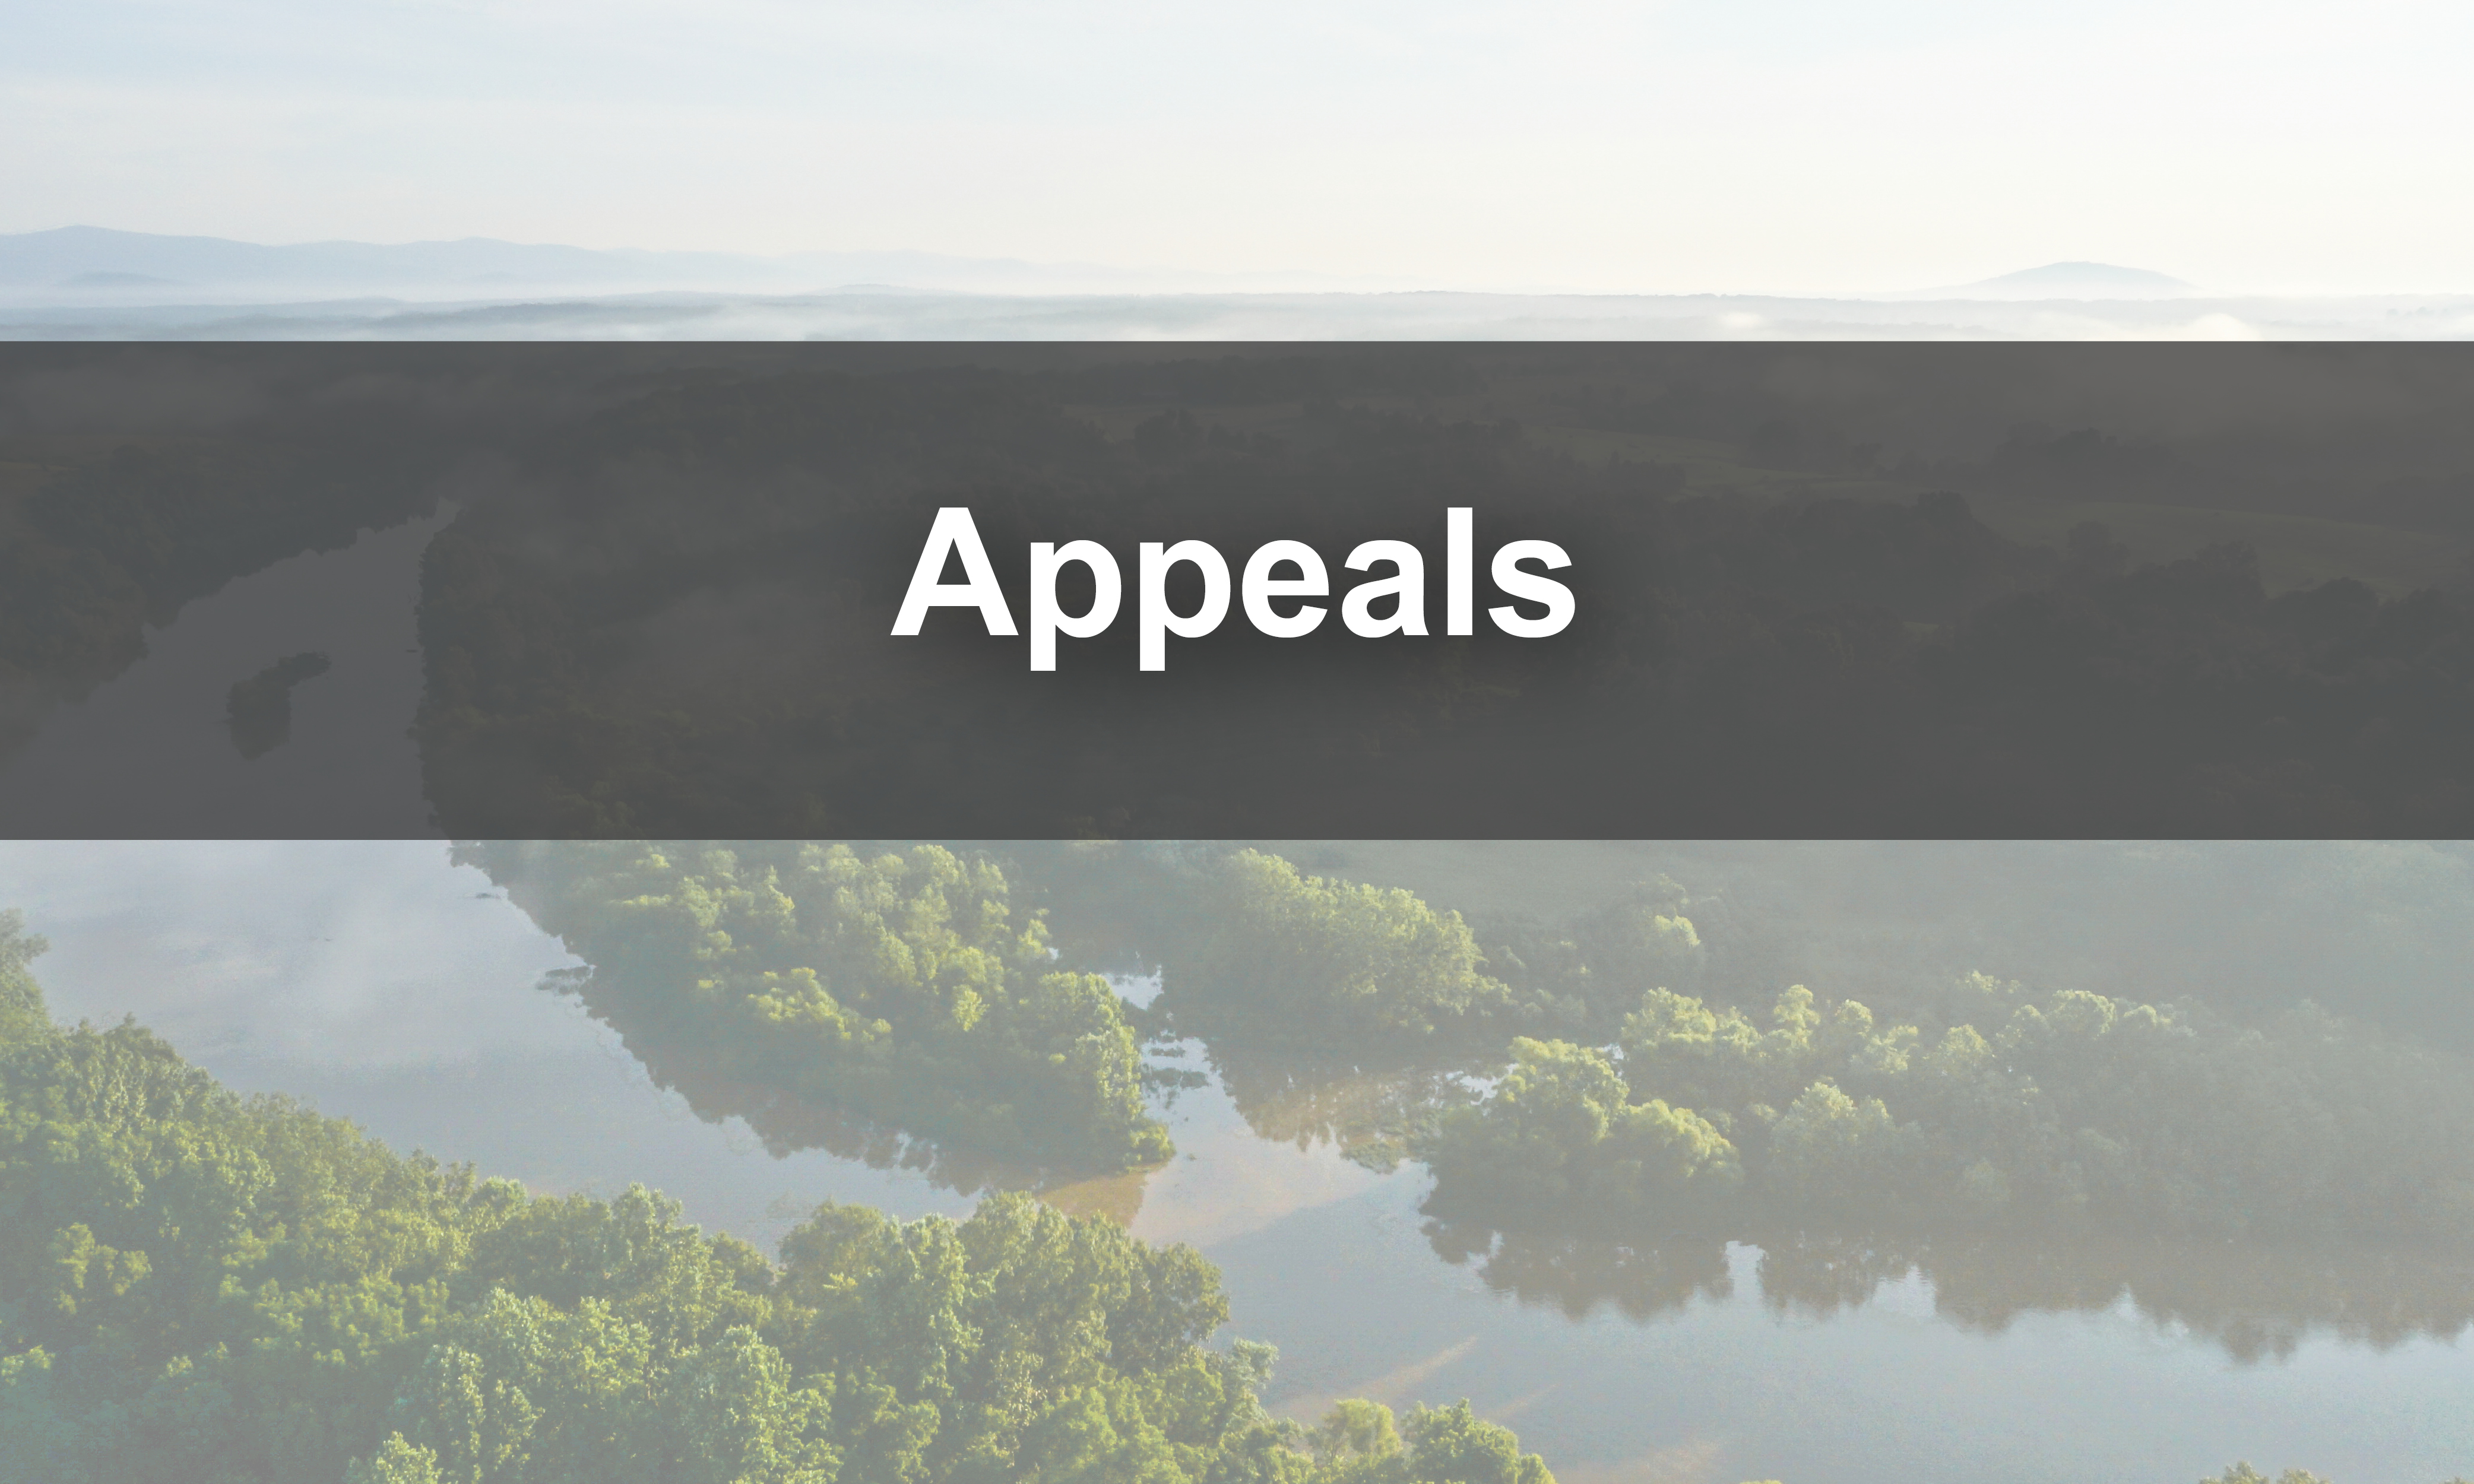 Link to appeals information